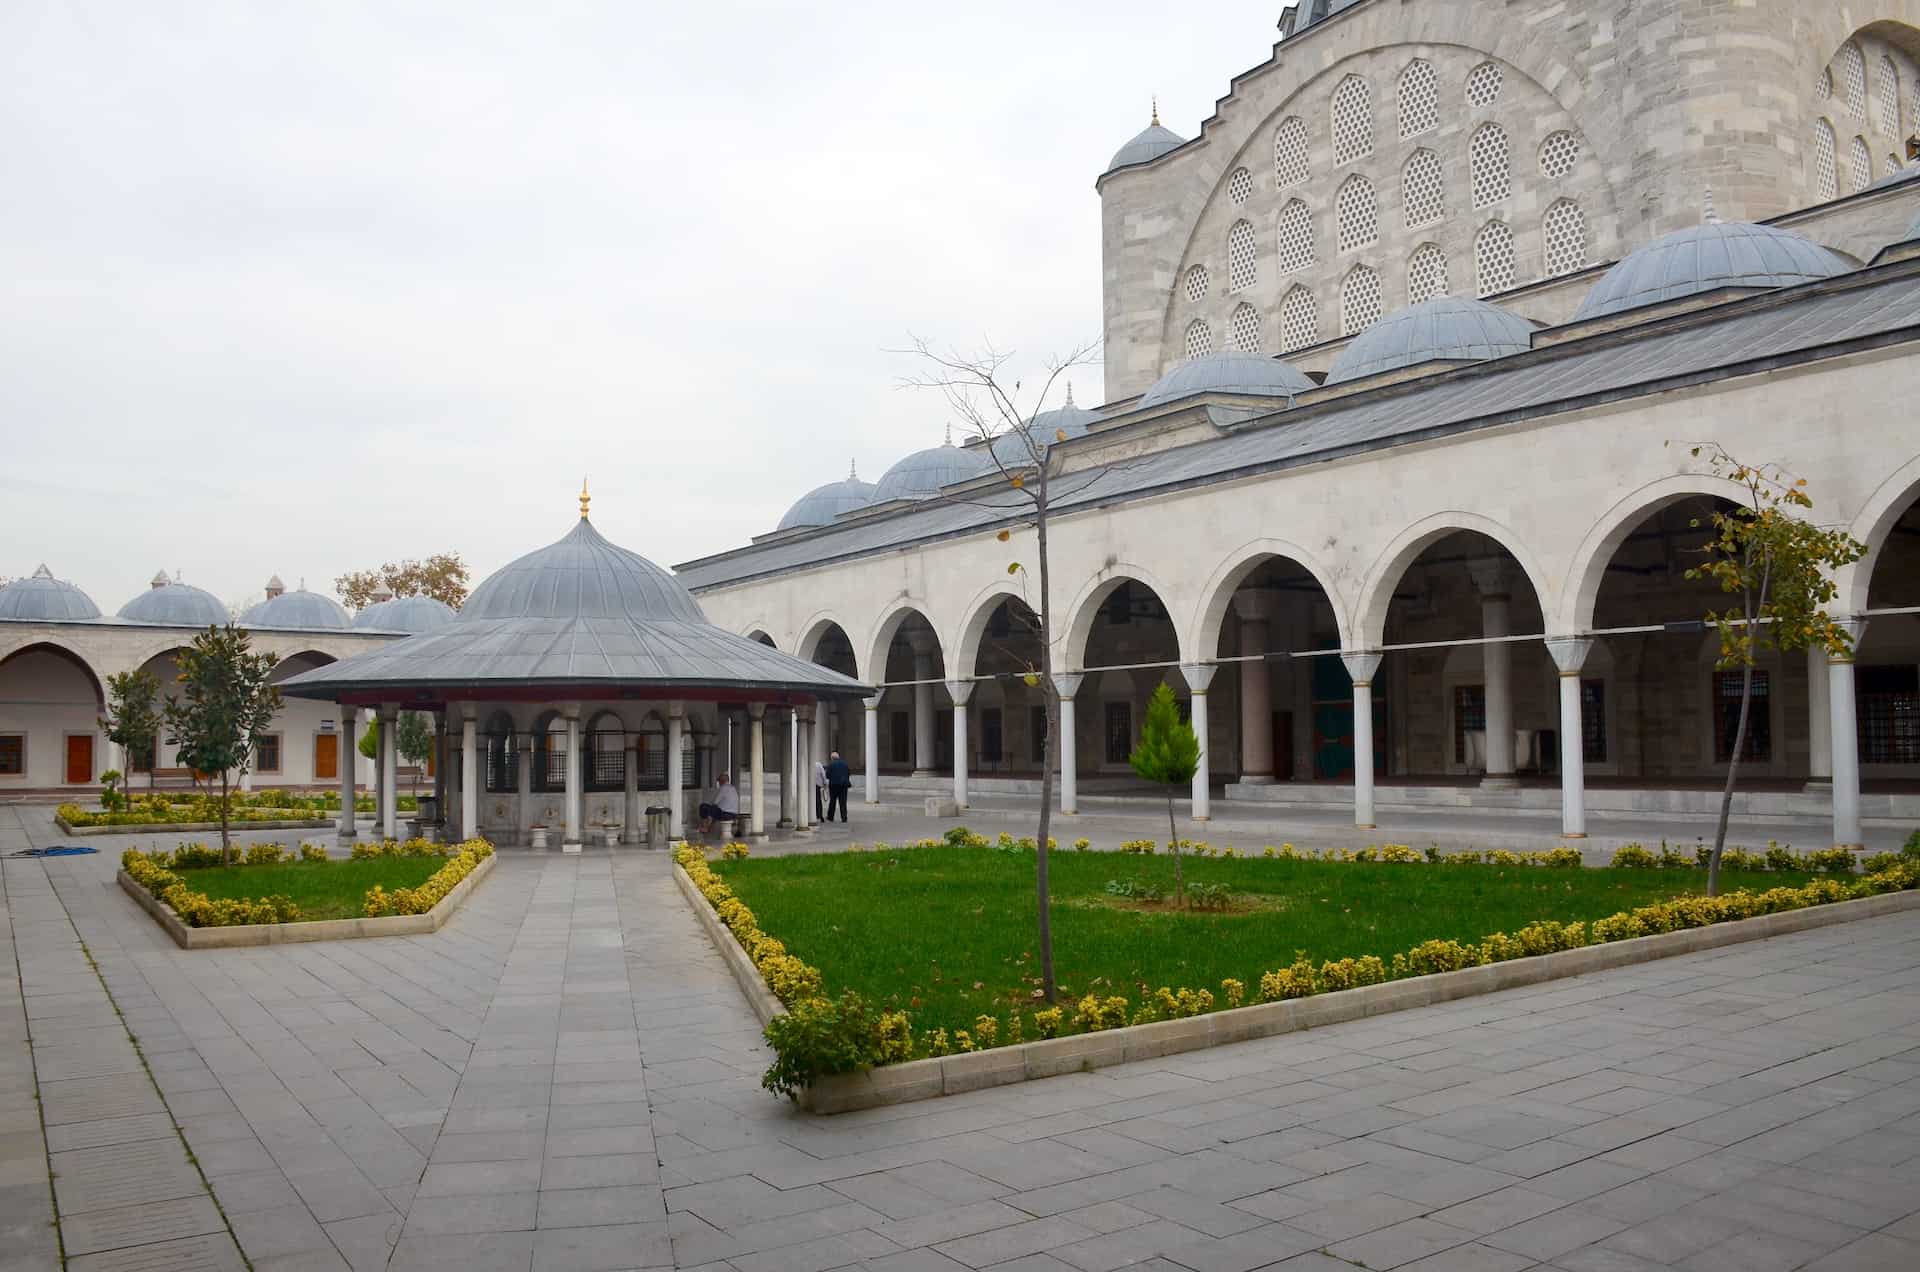 Courtyard at the Mihrimah Sultan Mosque